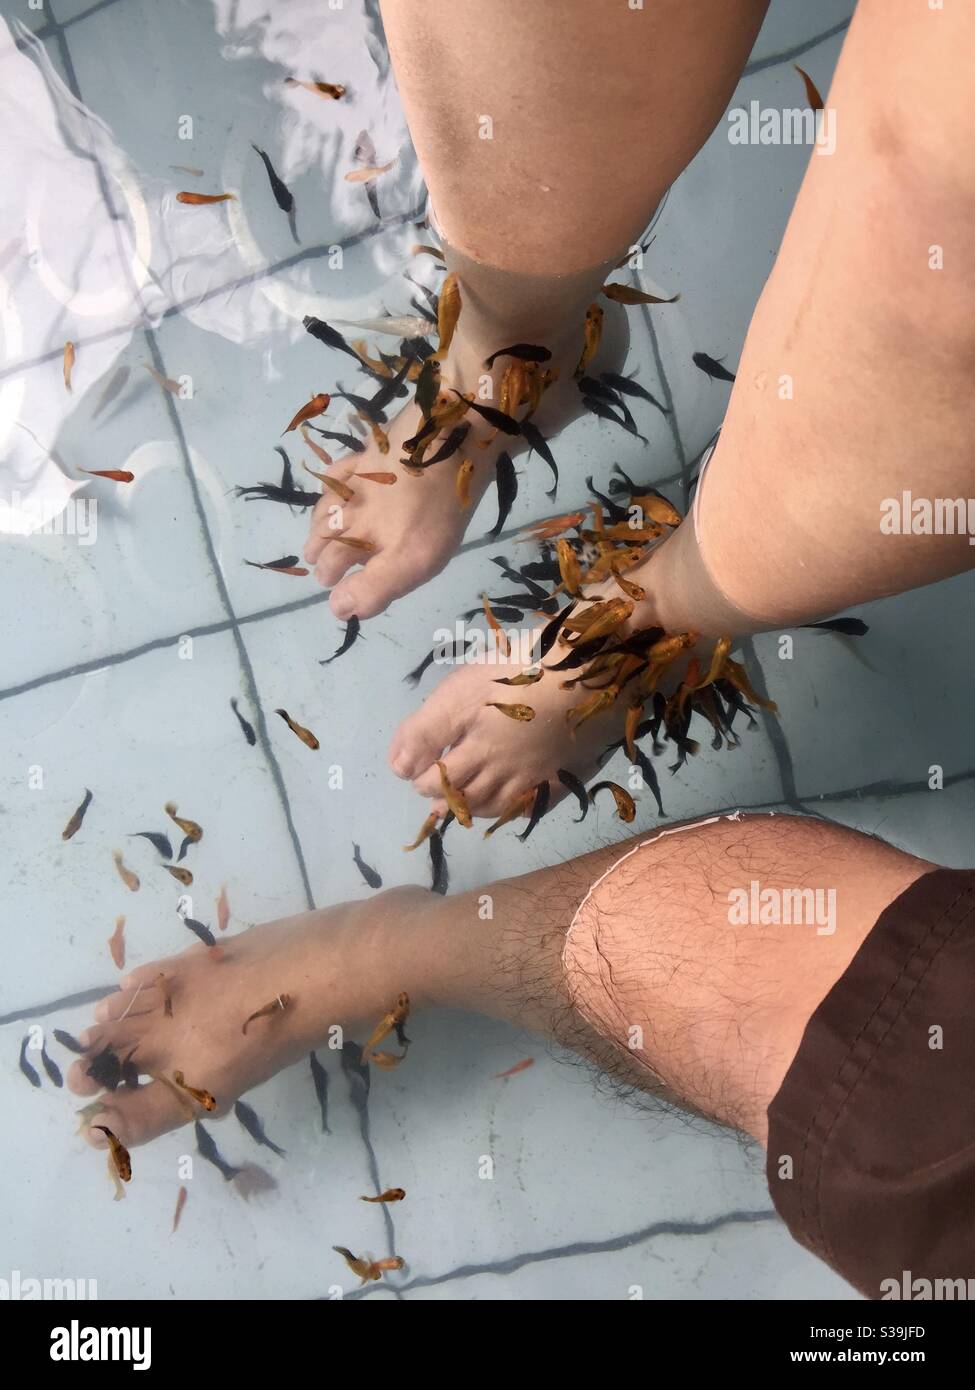 Fishes Cleaning Feet Soaked in Water Stock Photo